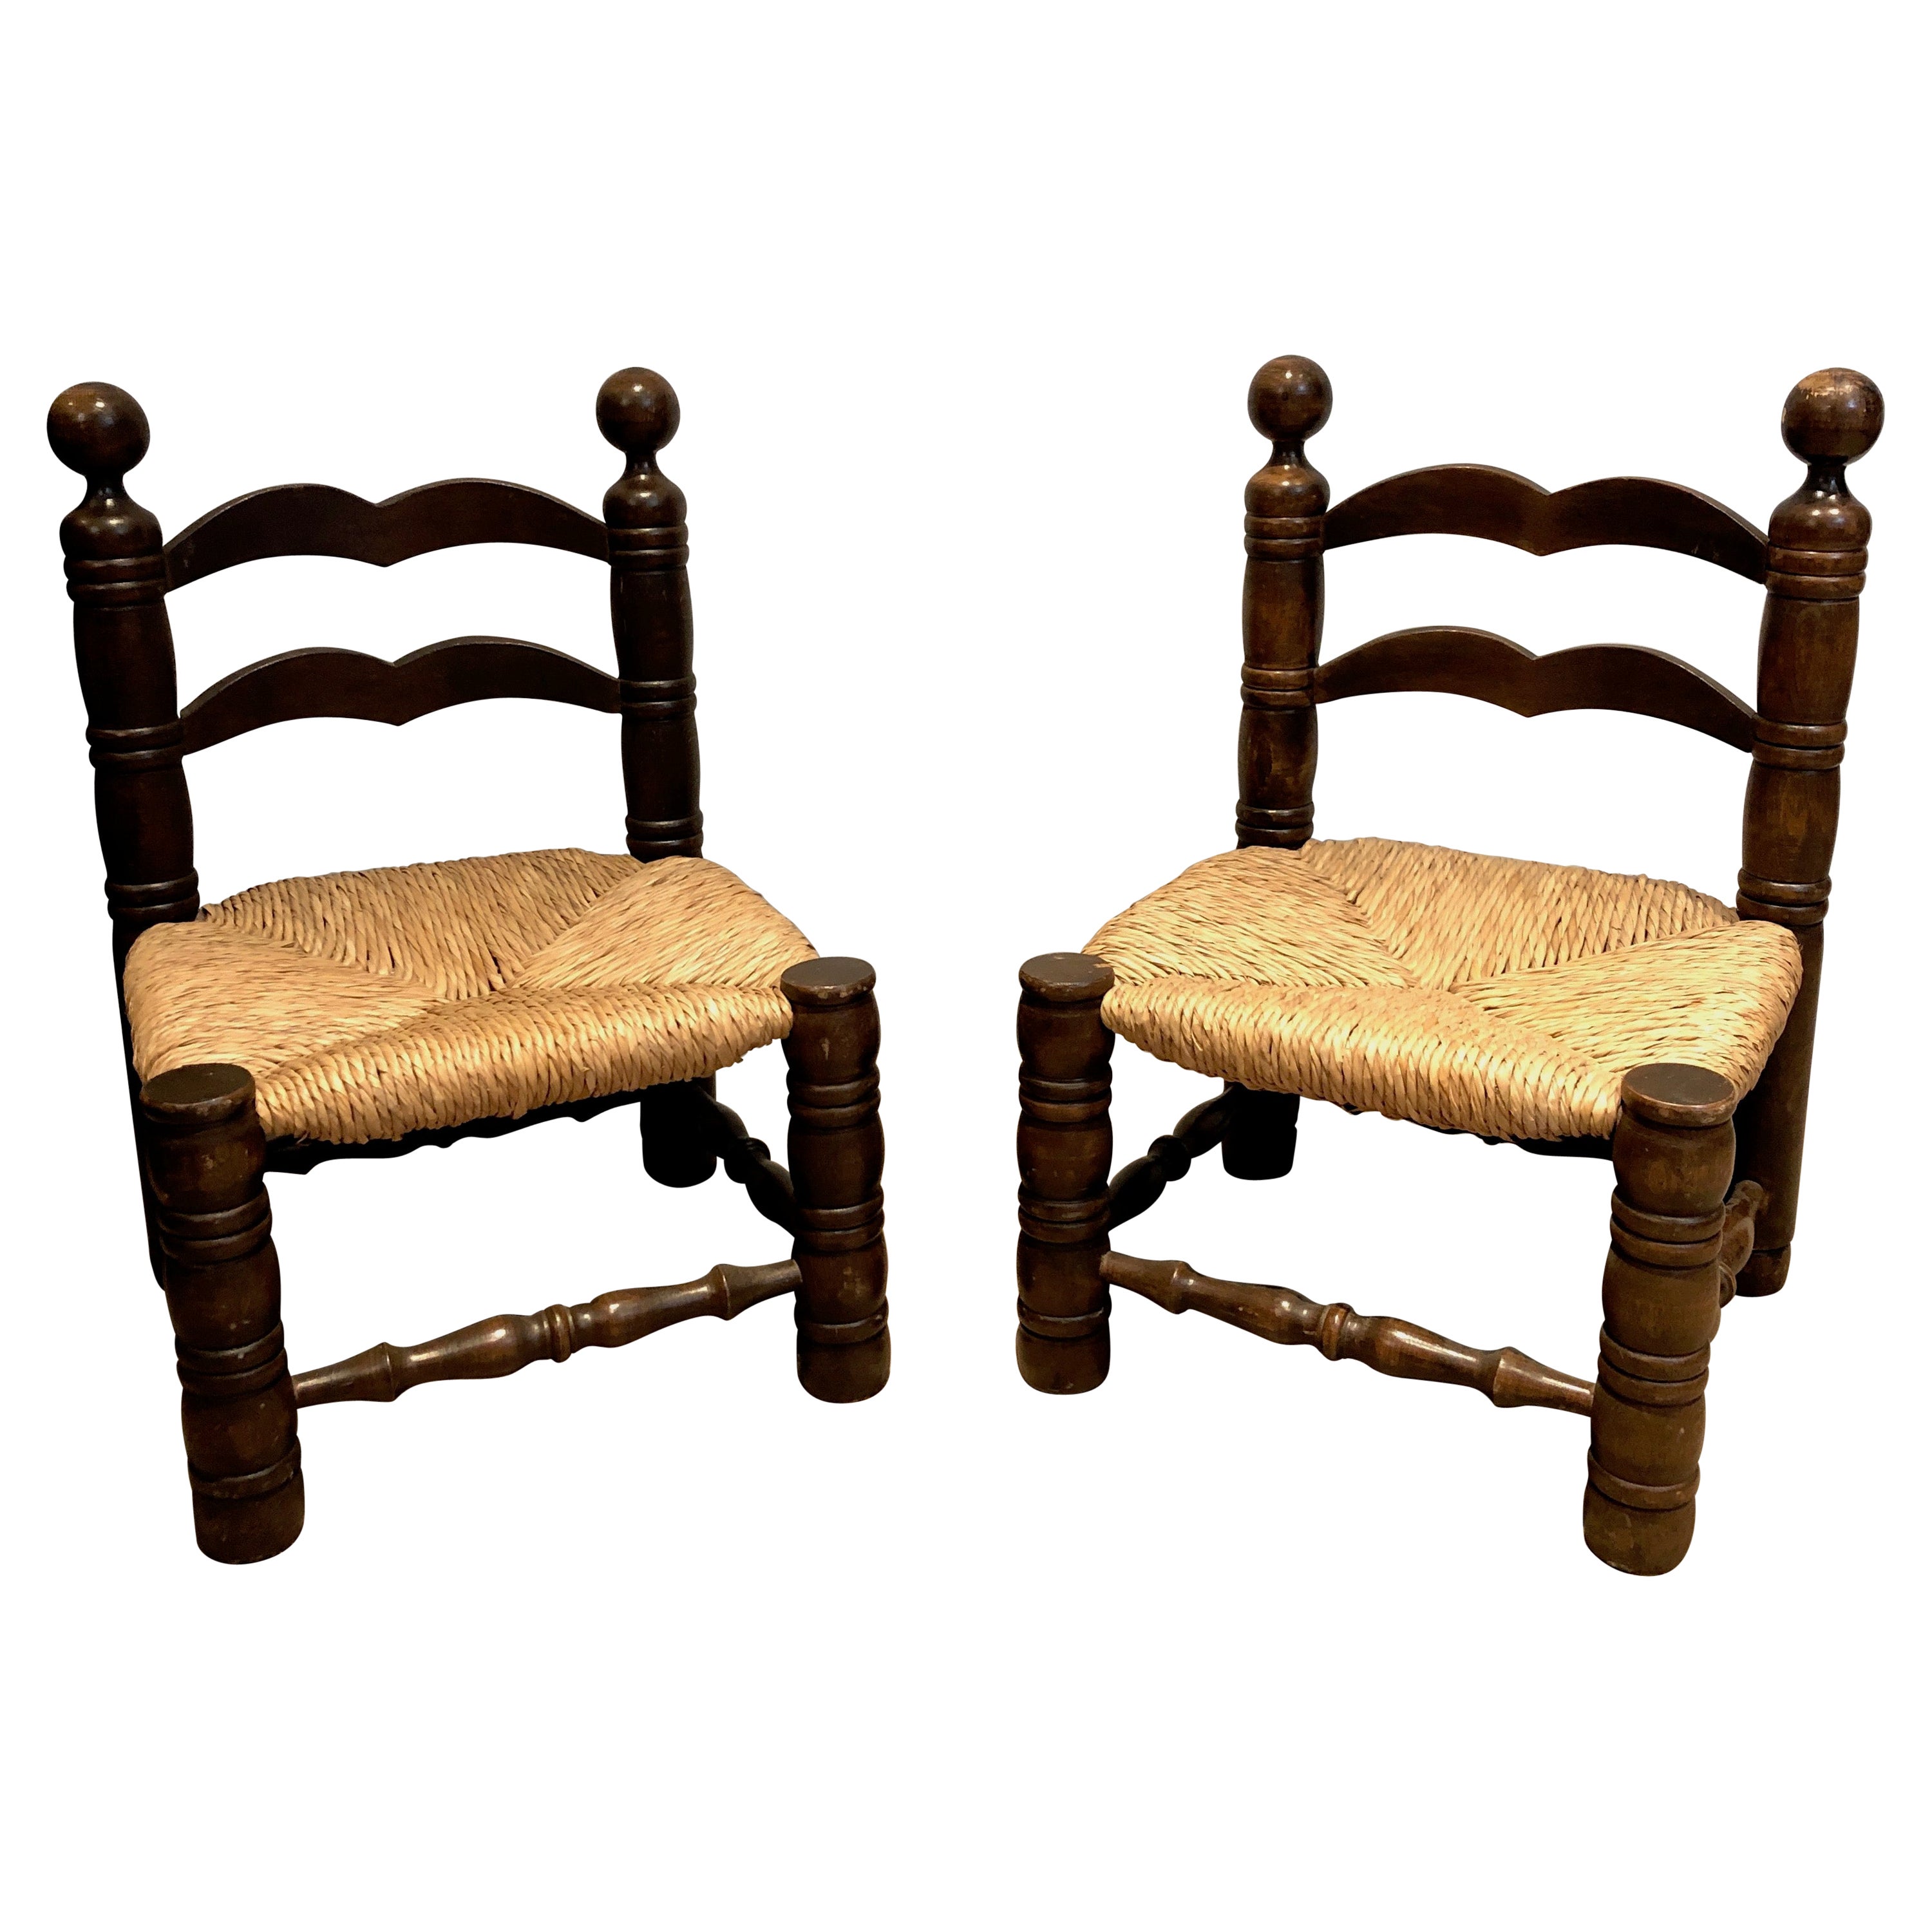 Pair of Low Brutalist Chairs. French work by Charles Dudouyt. Circa 1920.